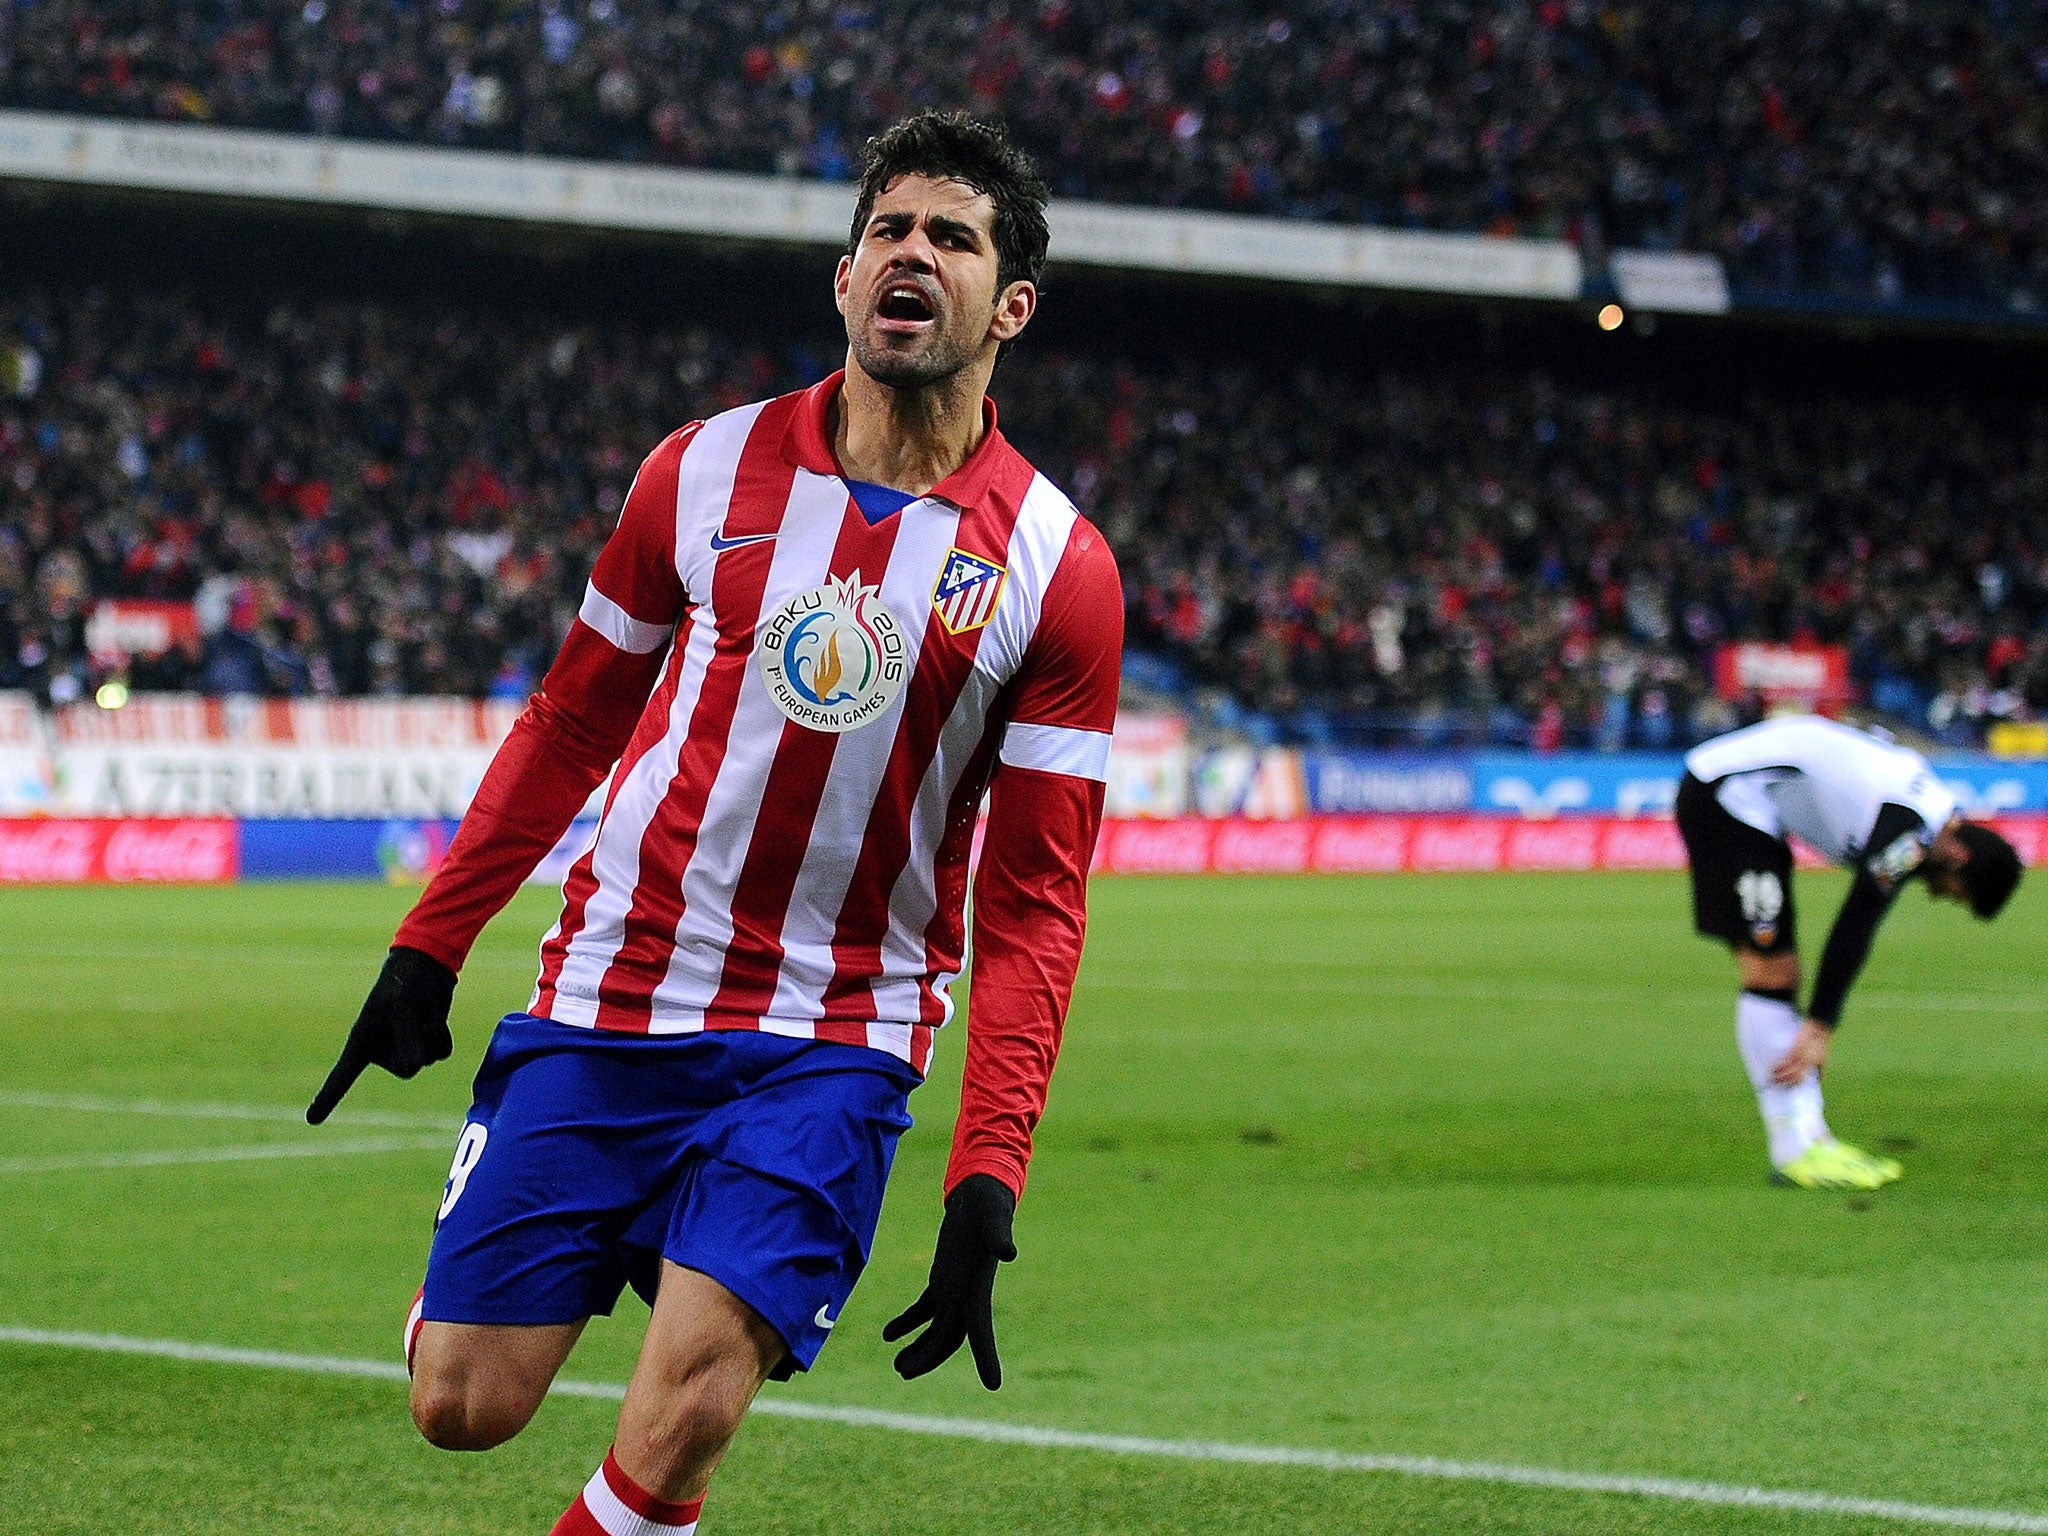 Diego Costa has replaced Falcao is the team's greatest threat